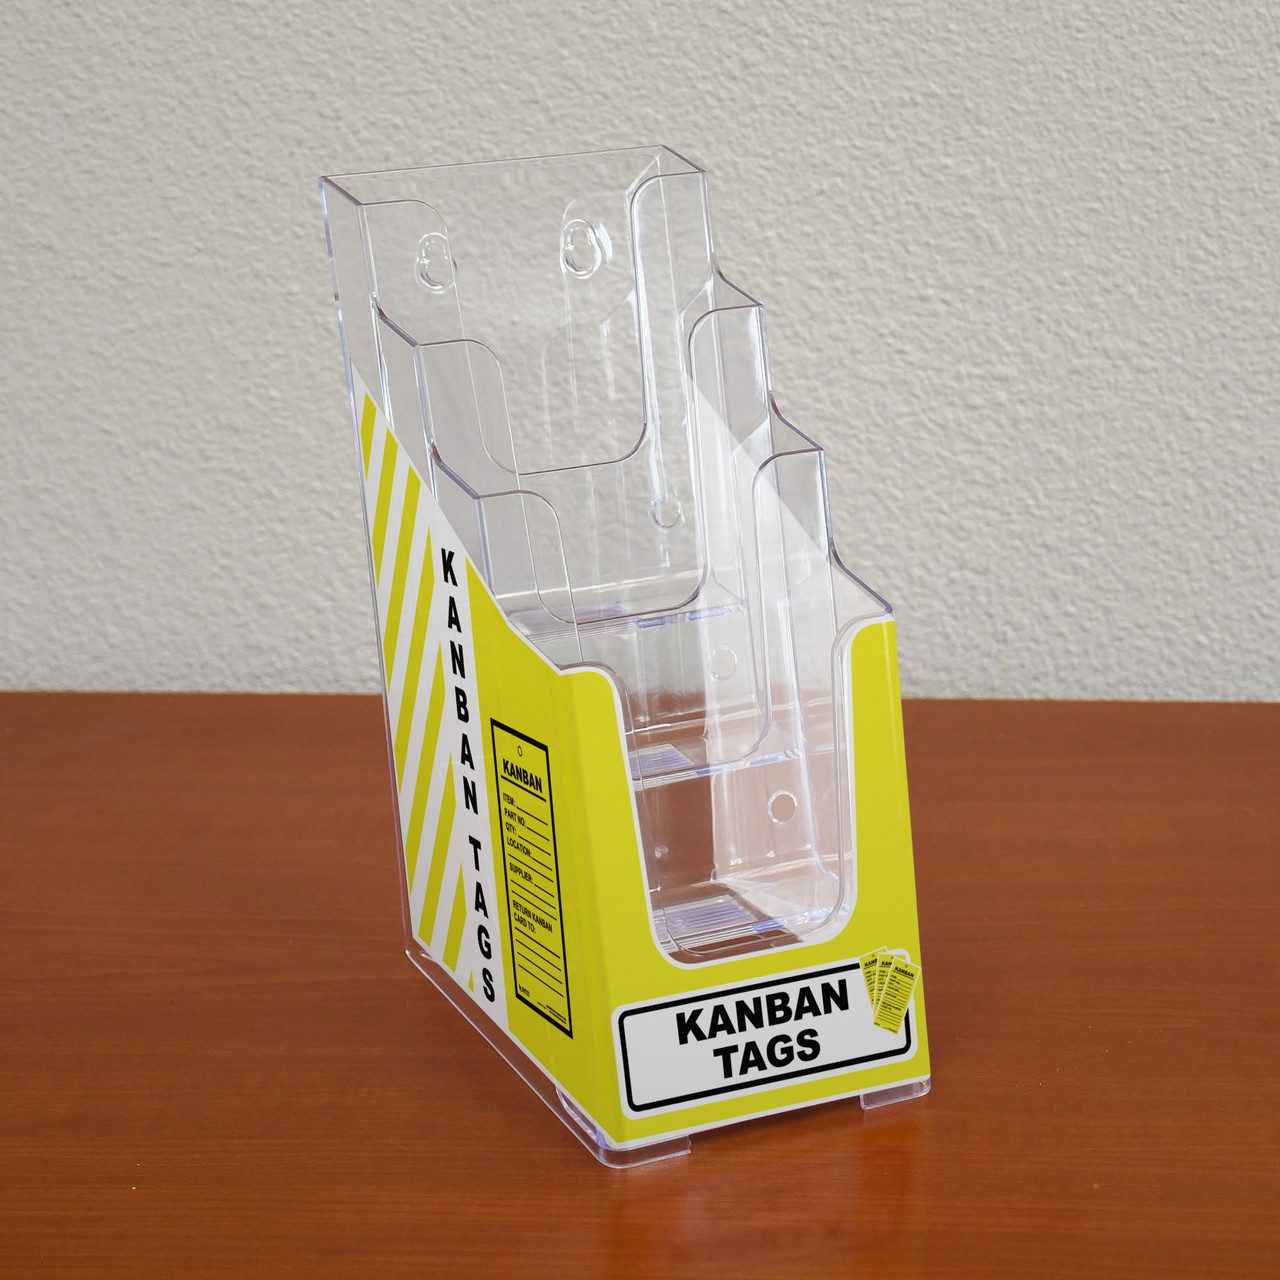 kanban-tags-yellow-tabletop-tag-holders-creative-safety-supply